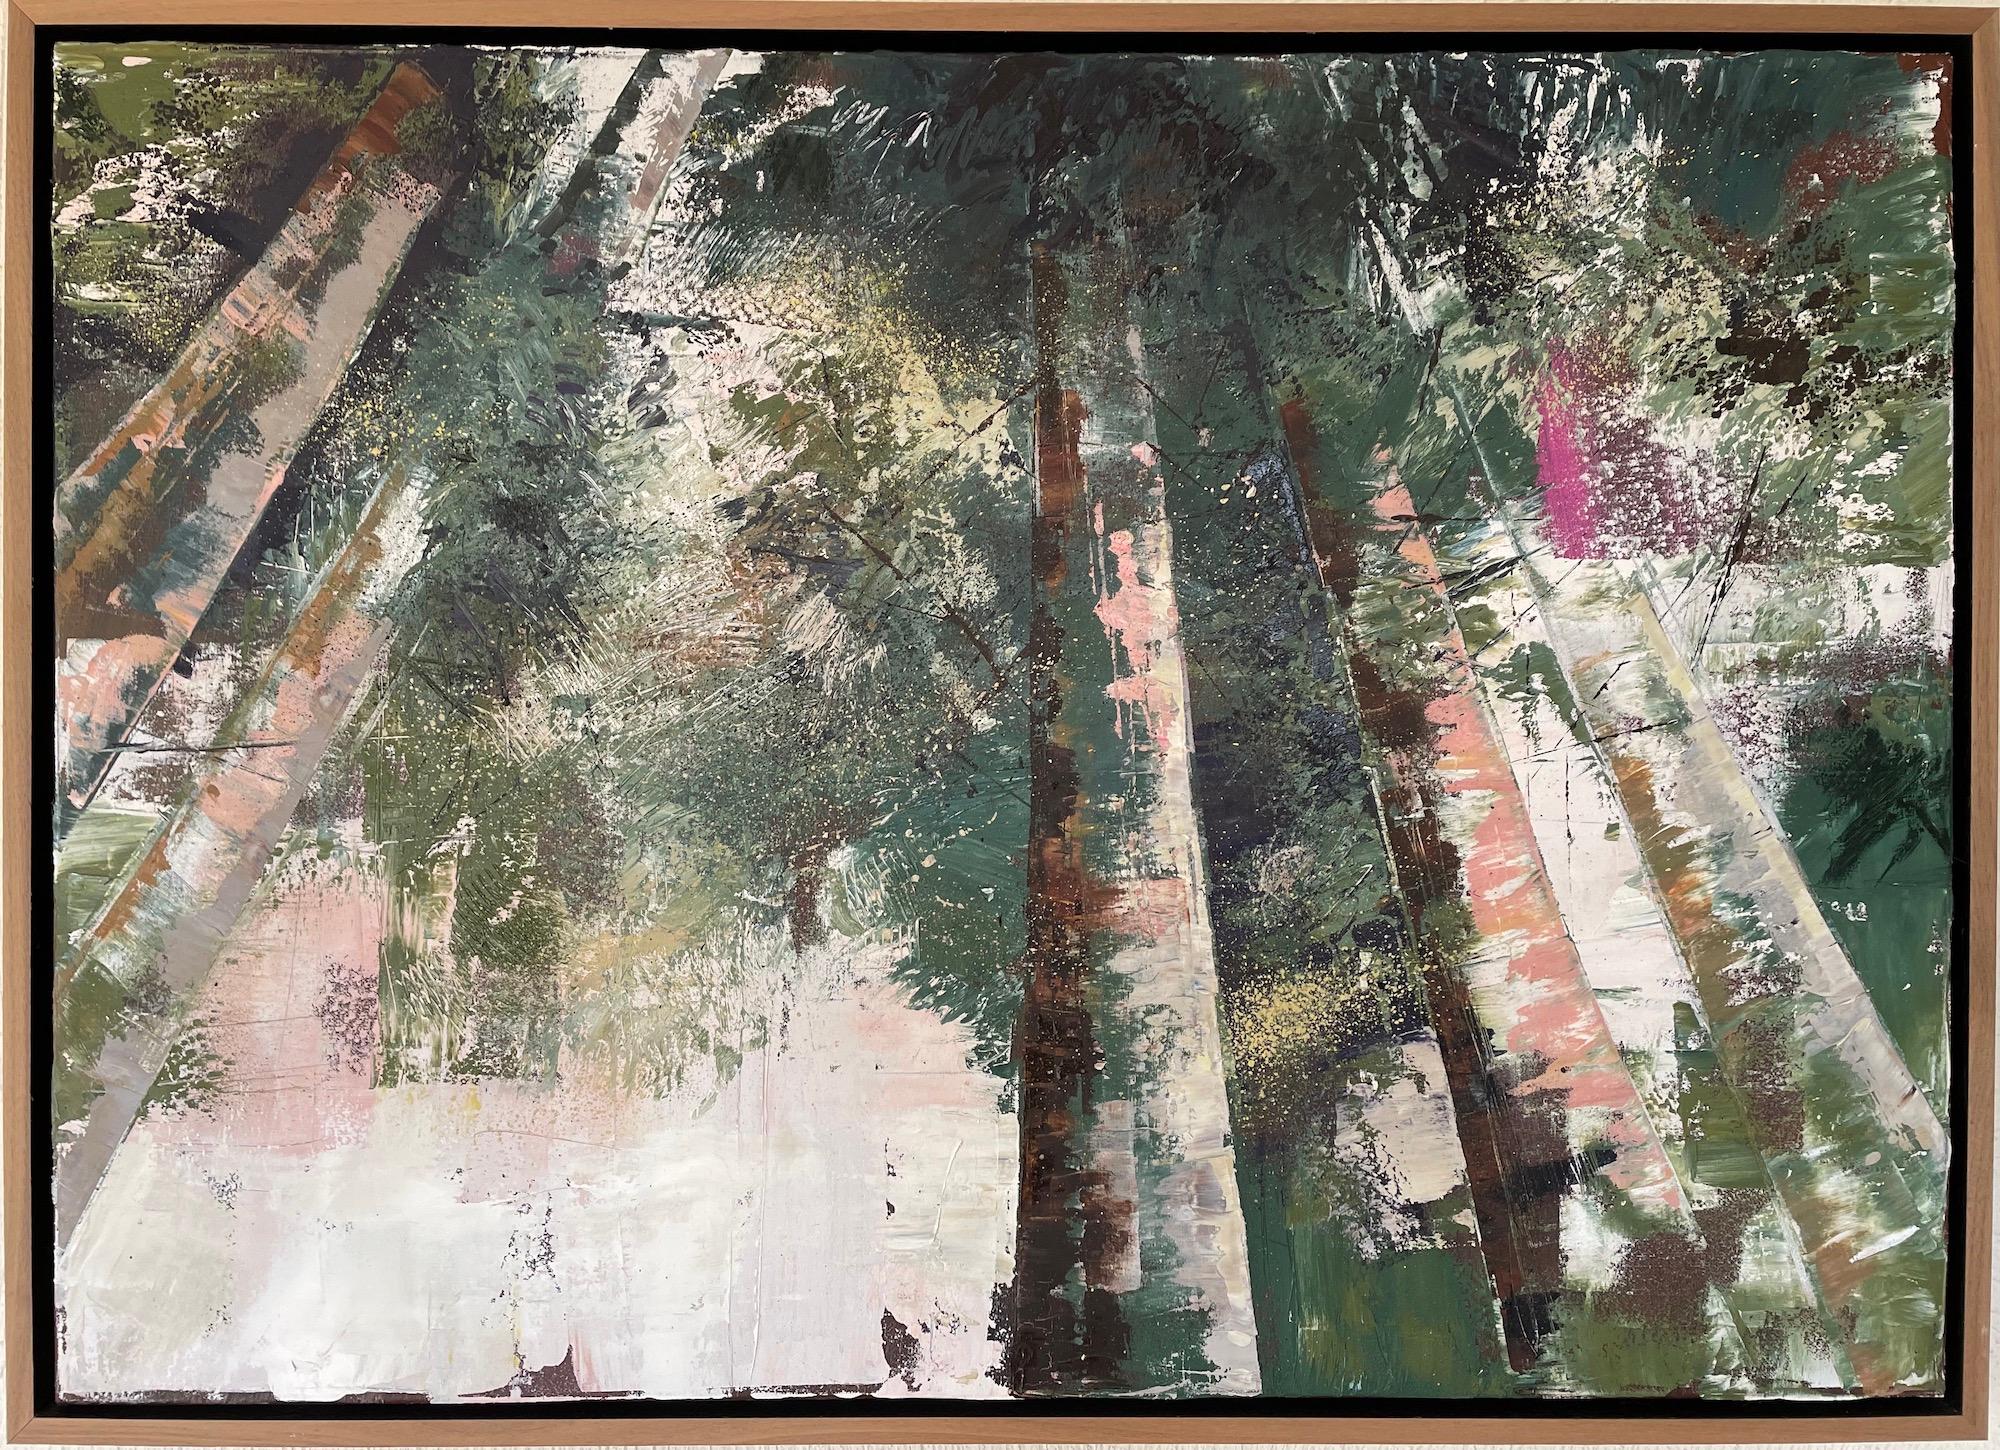 Looking up through the tree tops brings a sense of freedom. I love the way the light shines through the branches creating patterns and textures. I've worked in acrylics for the first layer to create bright bursts of pink. Then layers of oil paint to